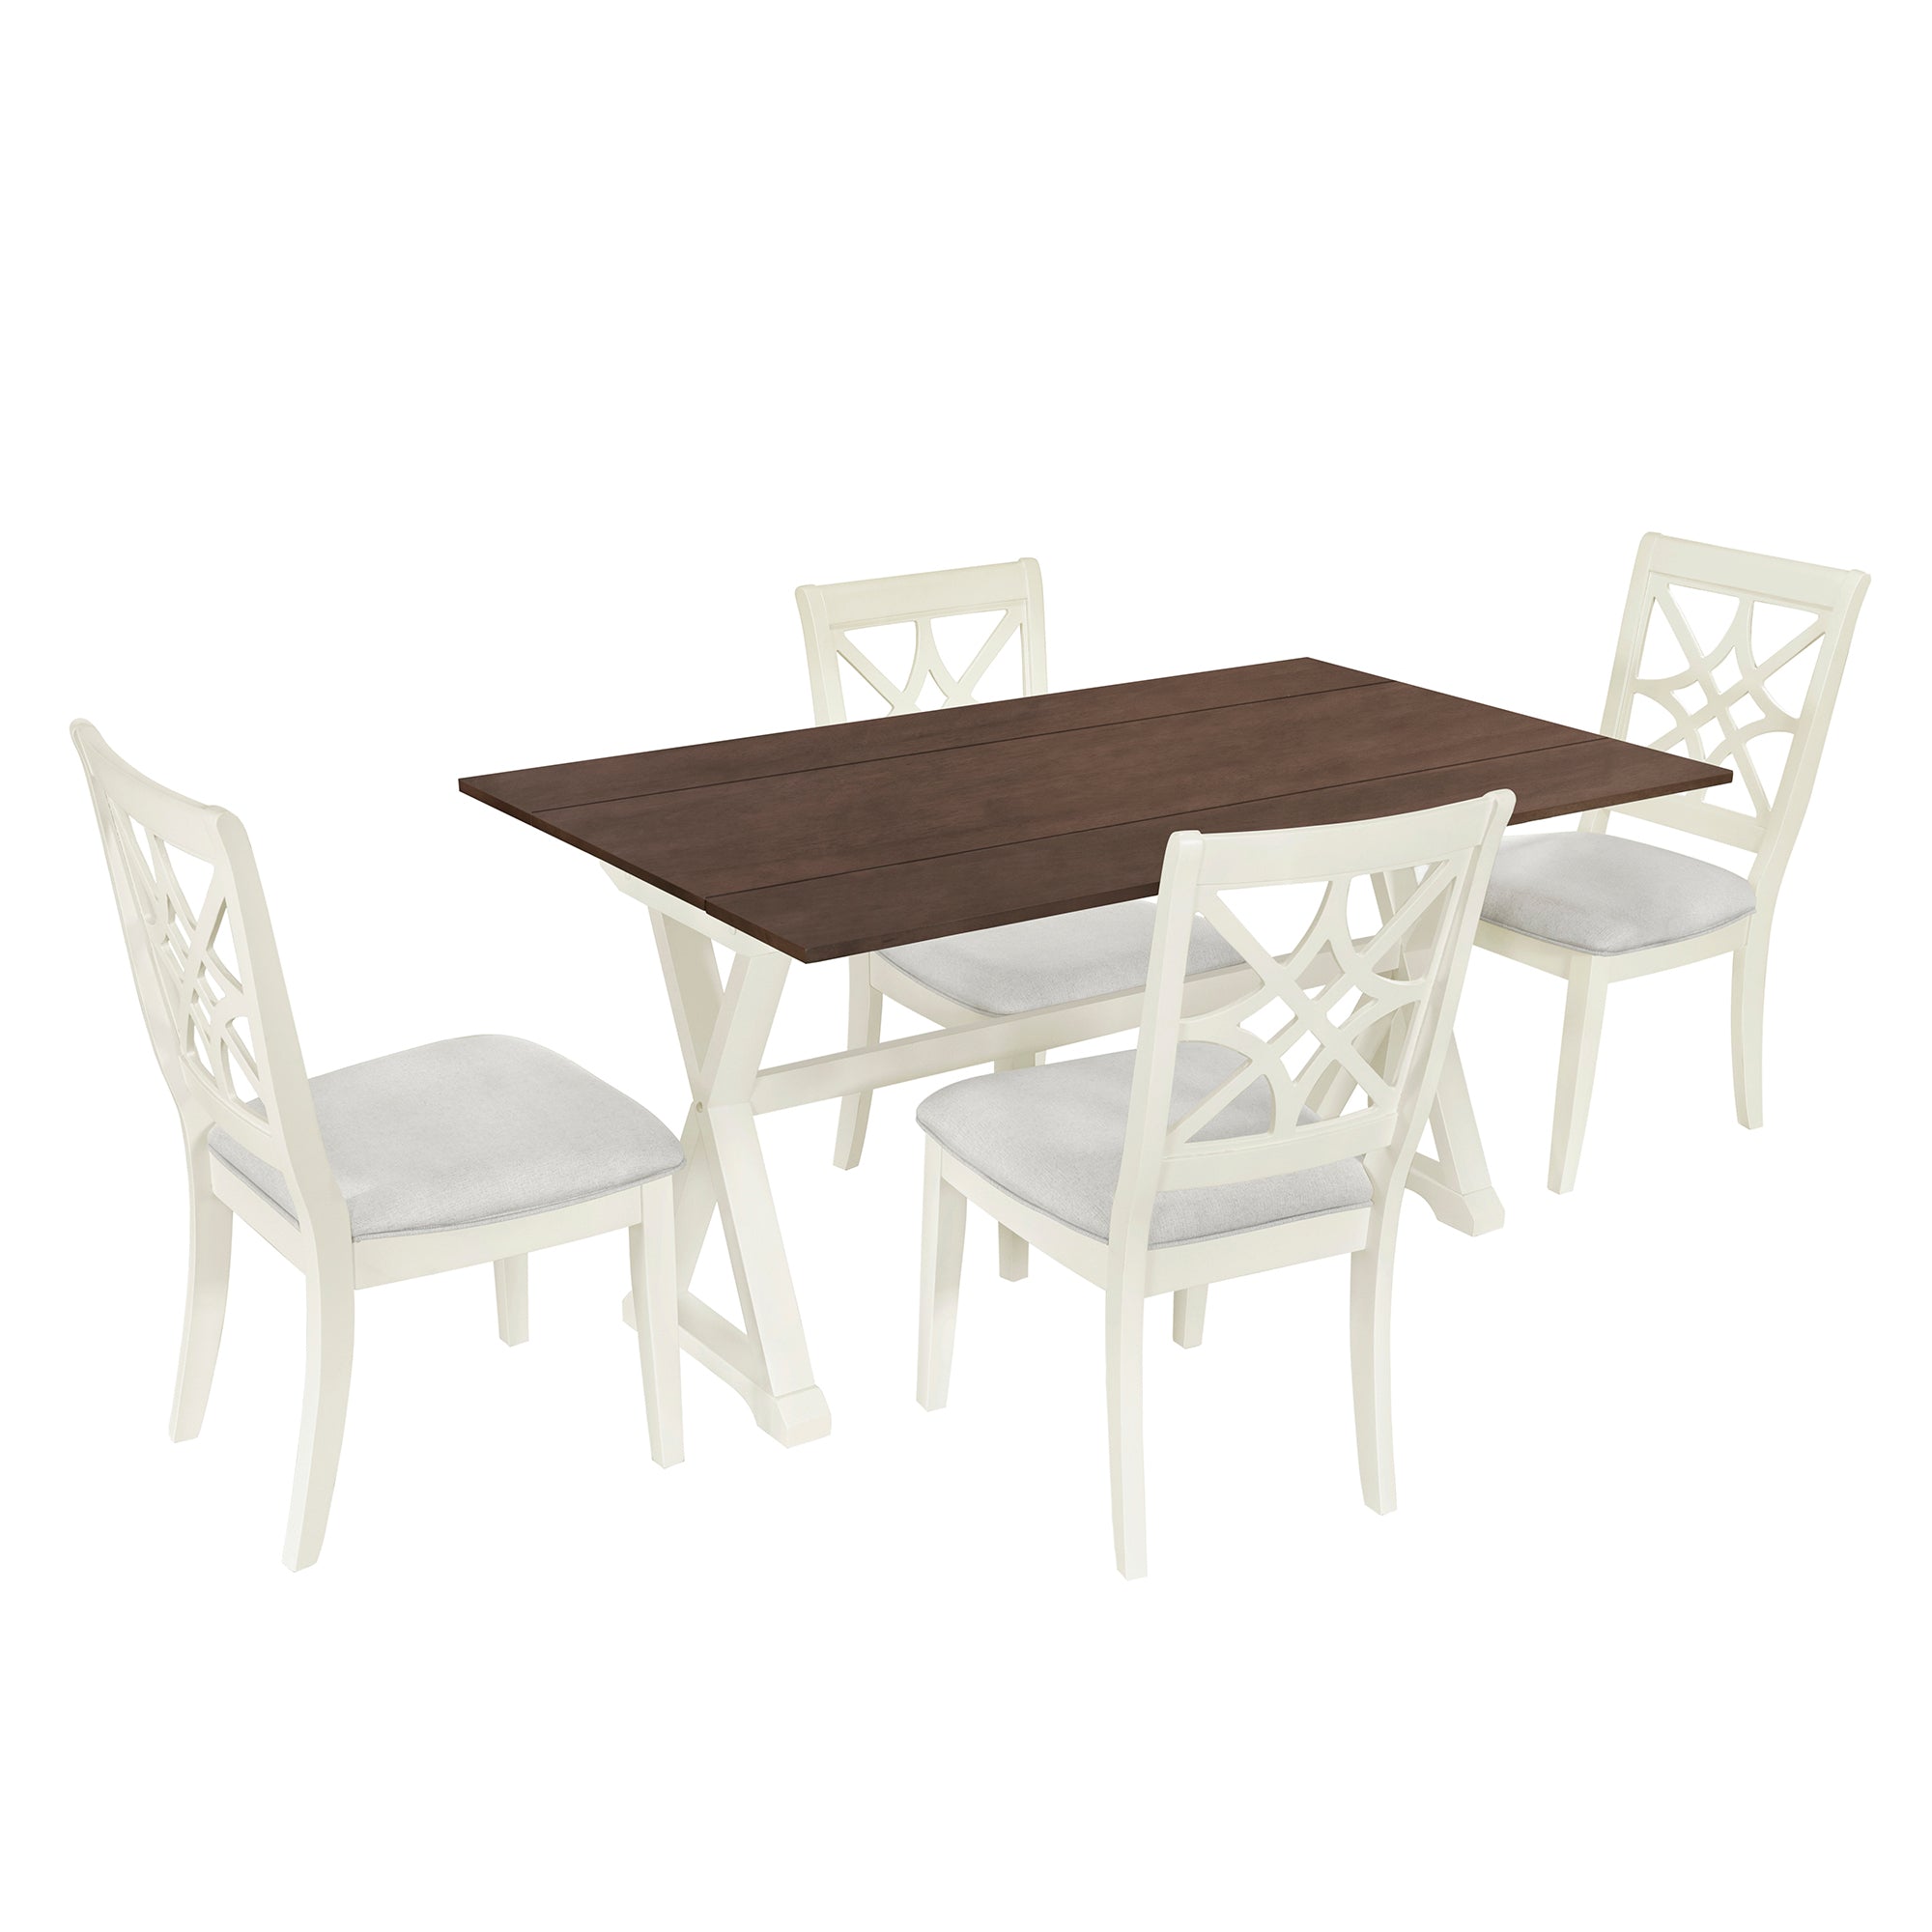 5 Piece 62*35.2inch Extendable Rubber Wood wood-dining